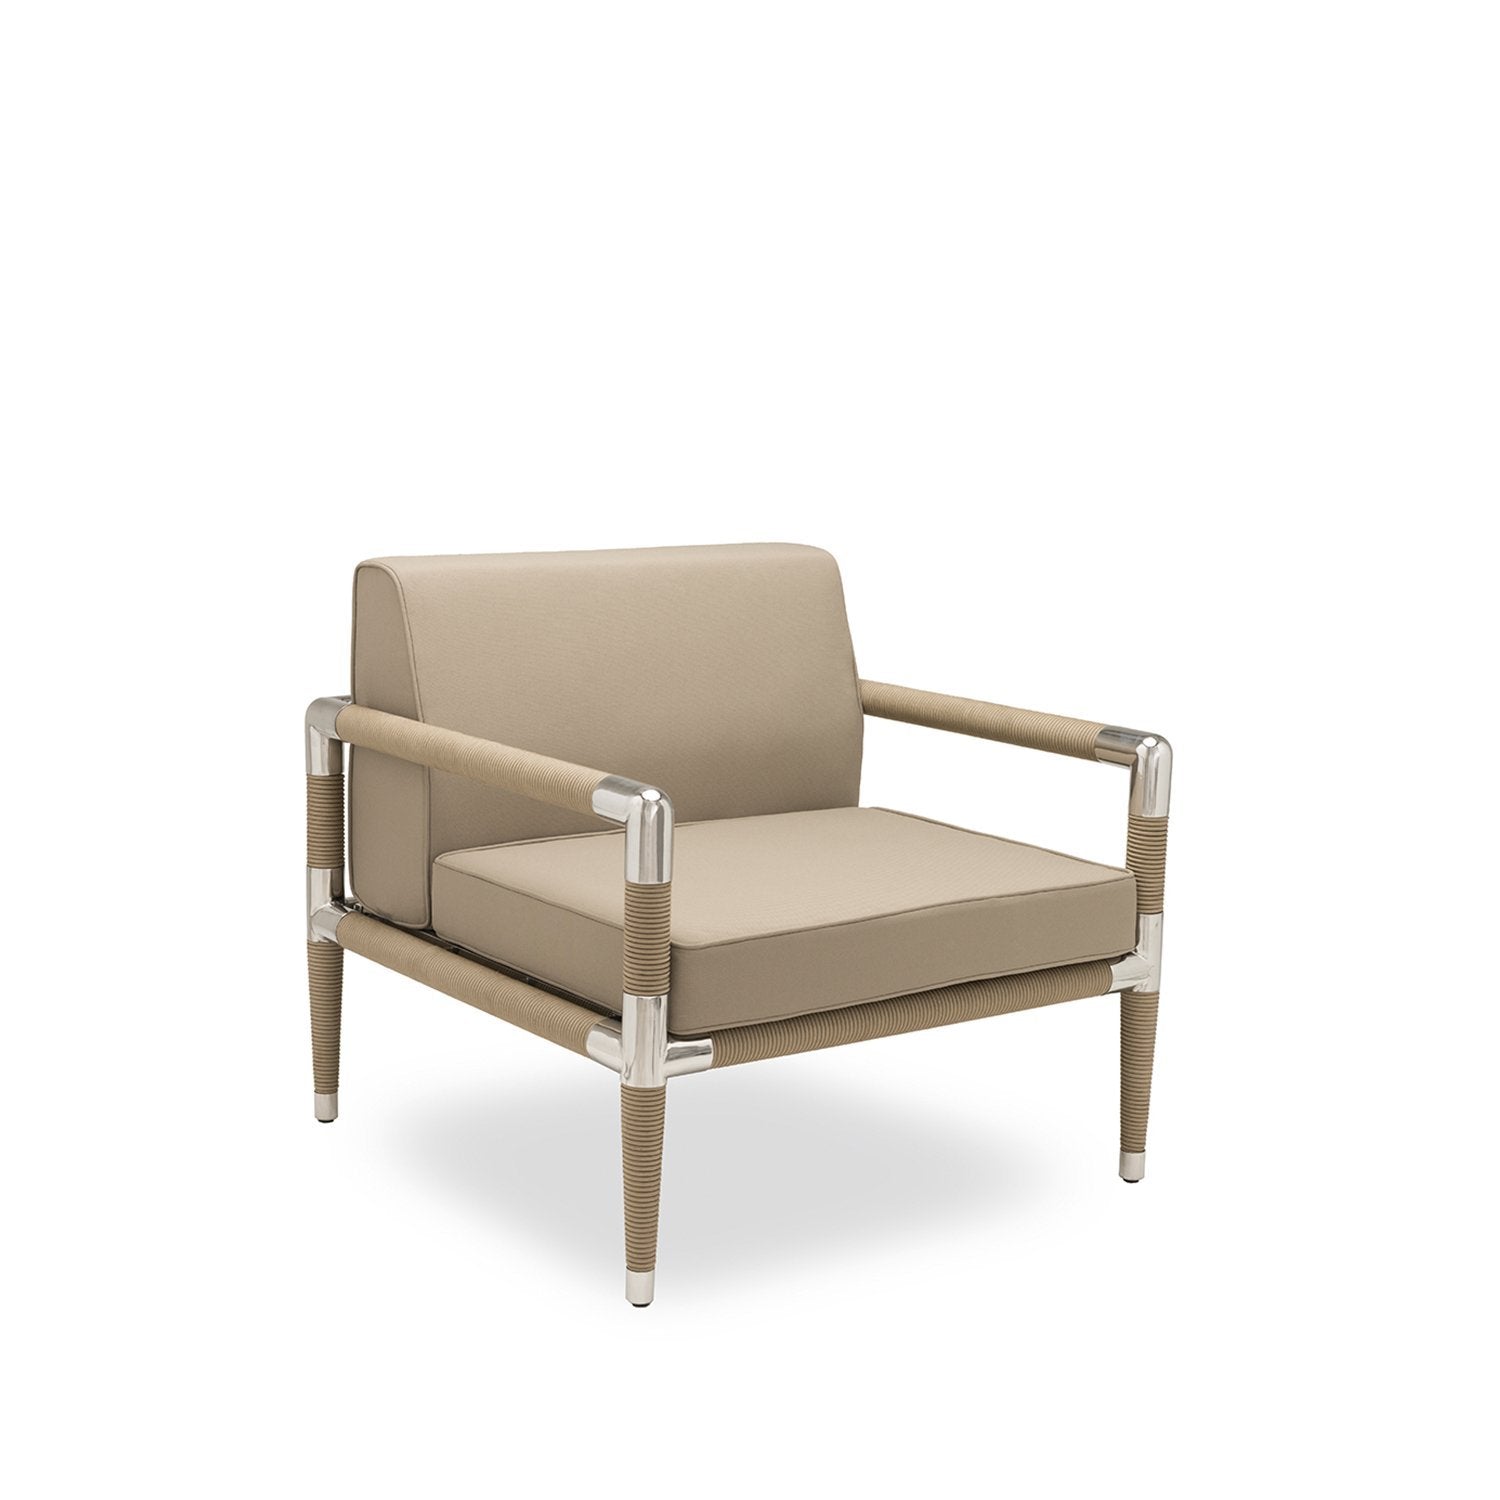 Marina armchair in Taupe